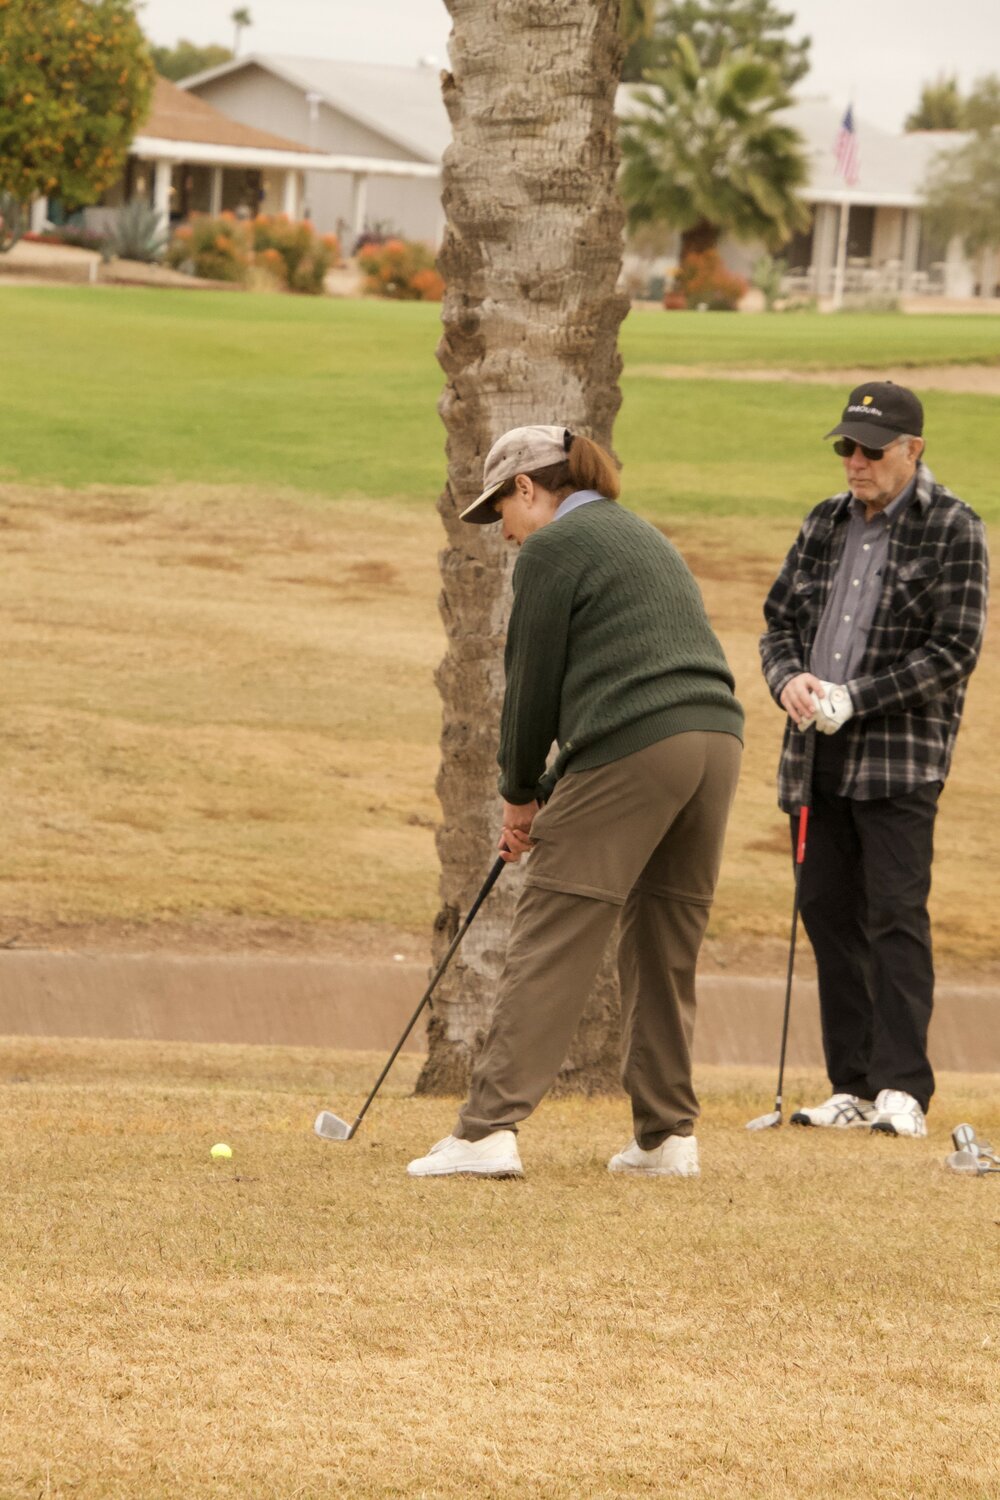 Temple Beth Shalom of the West Valley will host its third annual Golf Classic March 3 in Sun City.